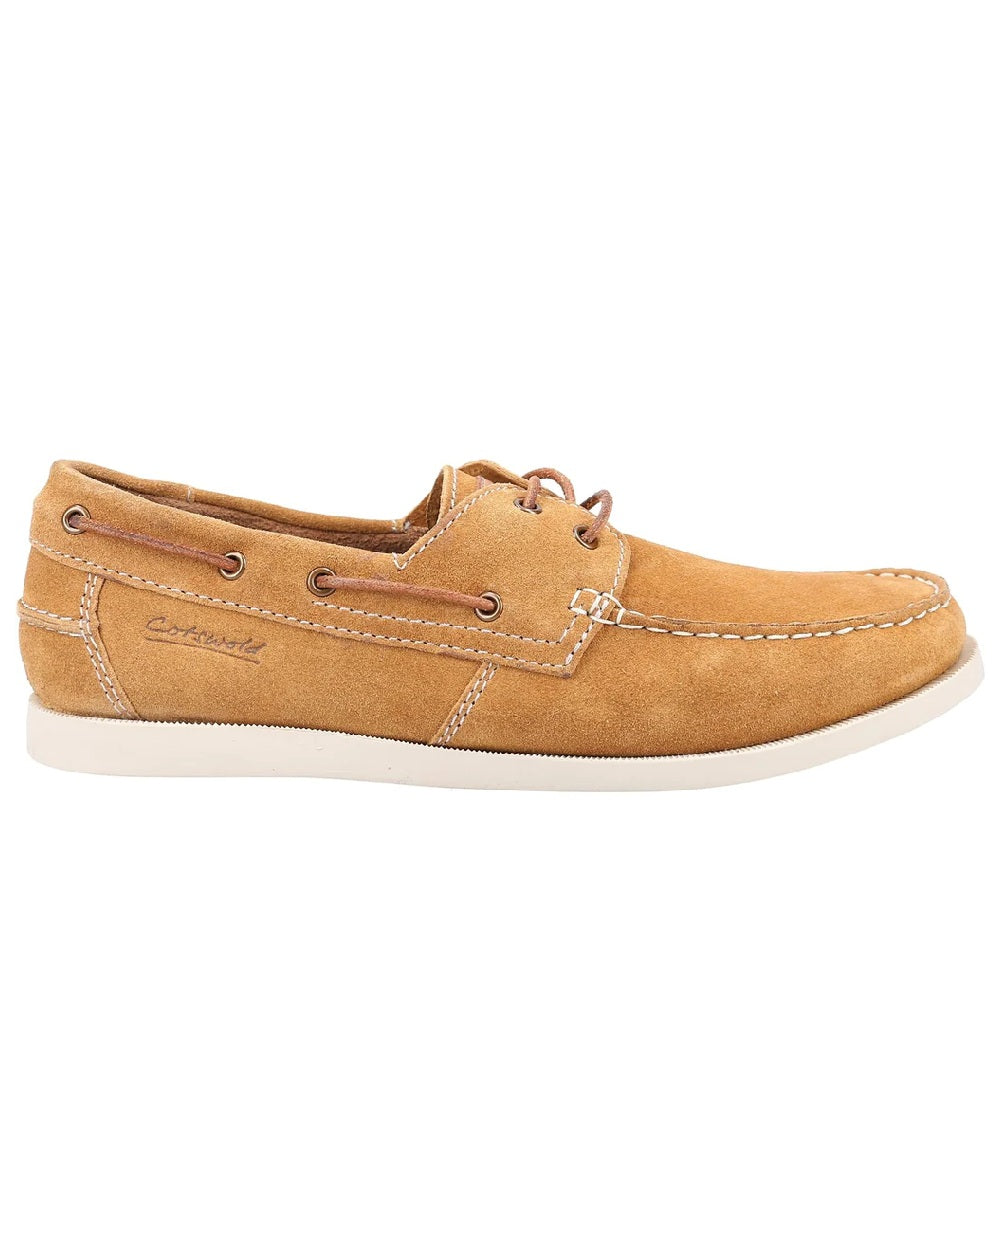 Cotswold Mitcheldean Boat Shoes in Camel